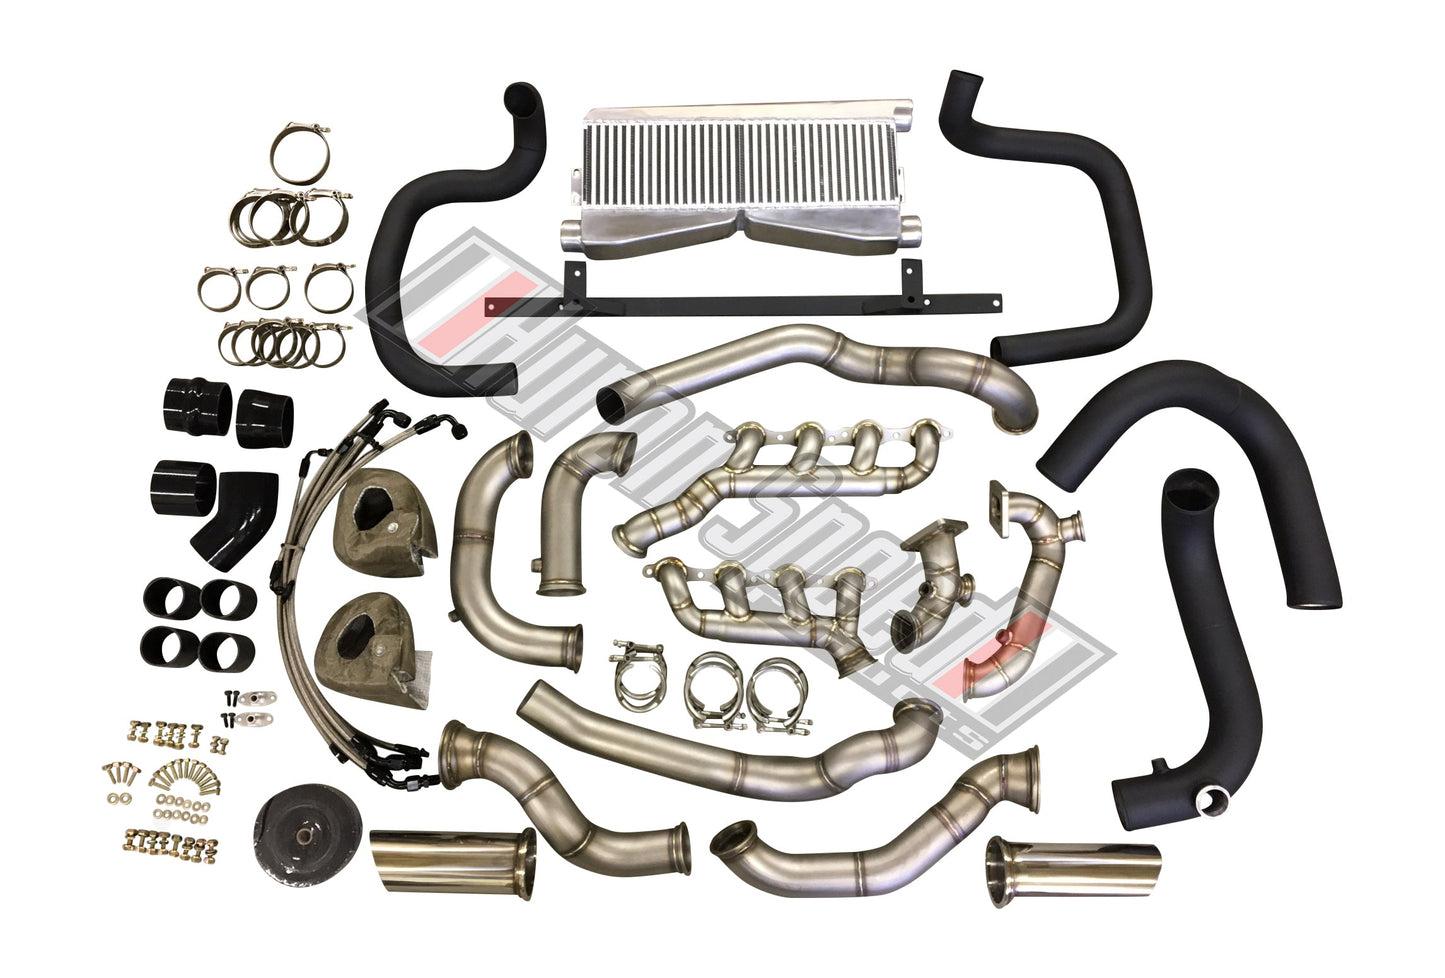 Huron Speed V3 Twin T4 Kit PACKAGE